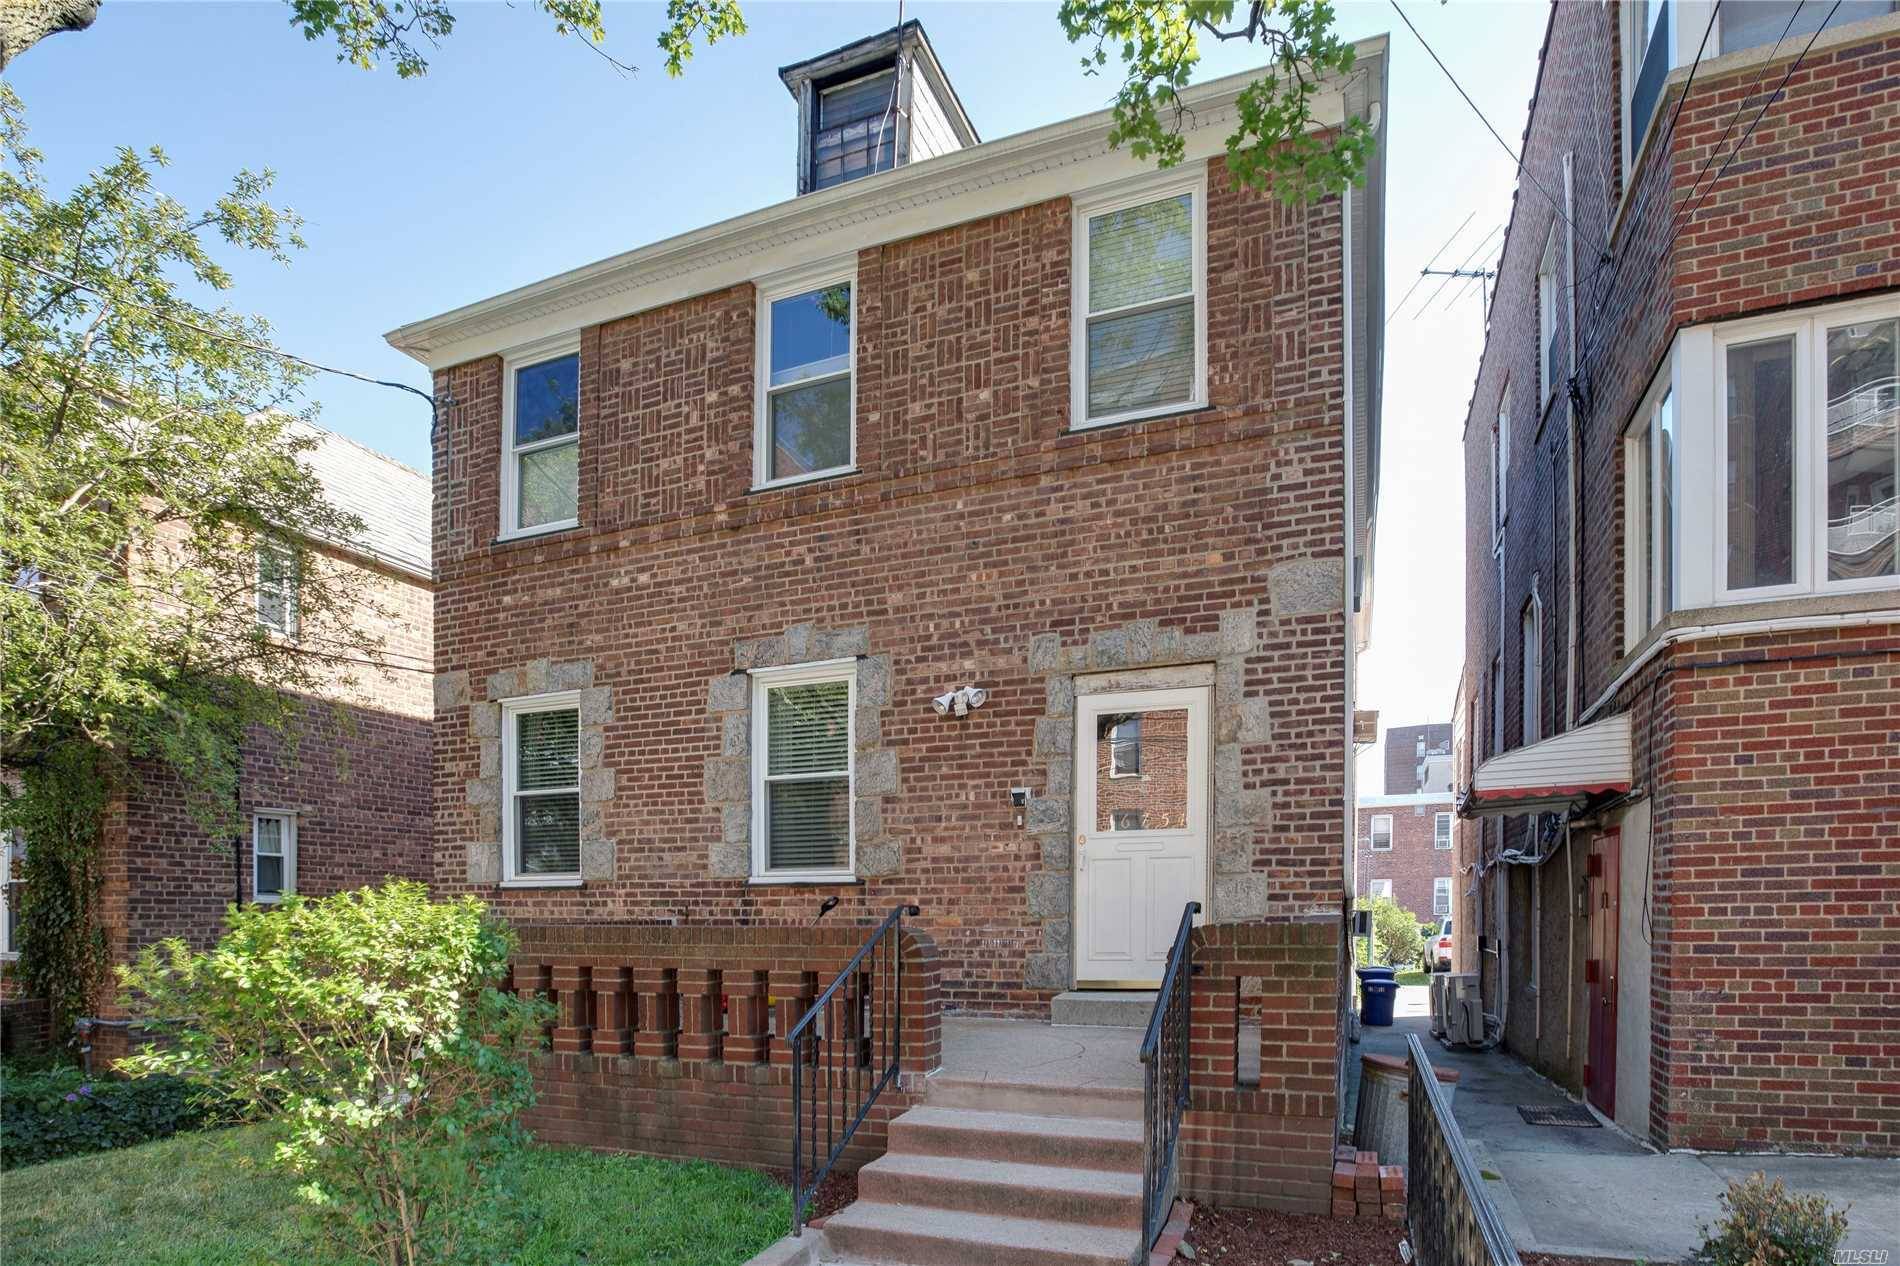 Detached Brick 2 Family House With 2 Car Garage On A Residential Tree Lined Street.